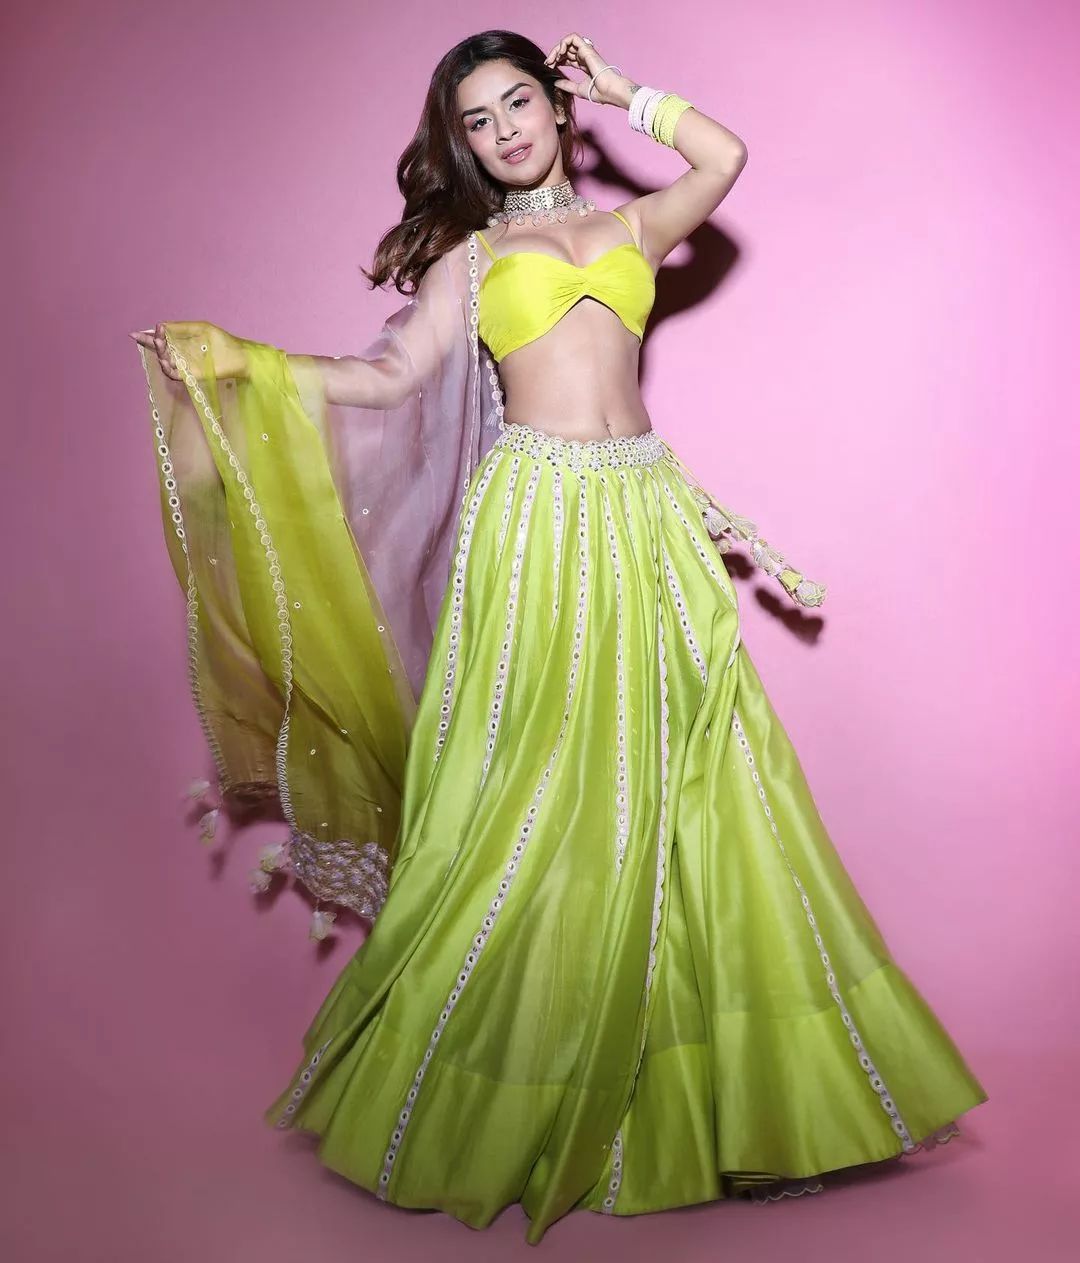 Avneet Kaur's Plunging Neckline in a Lime Green Lehenga: A Daring Fashion Move